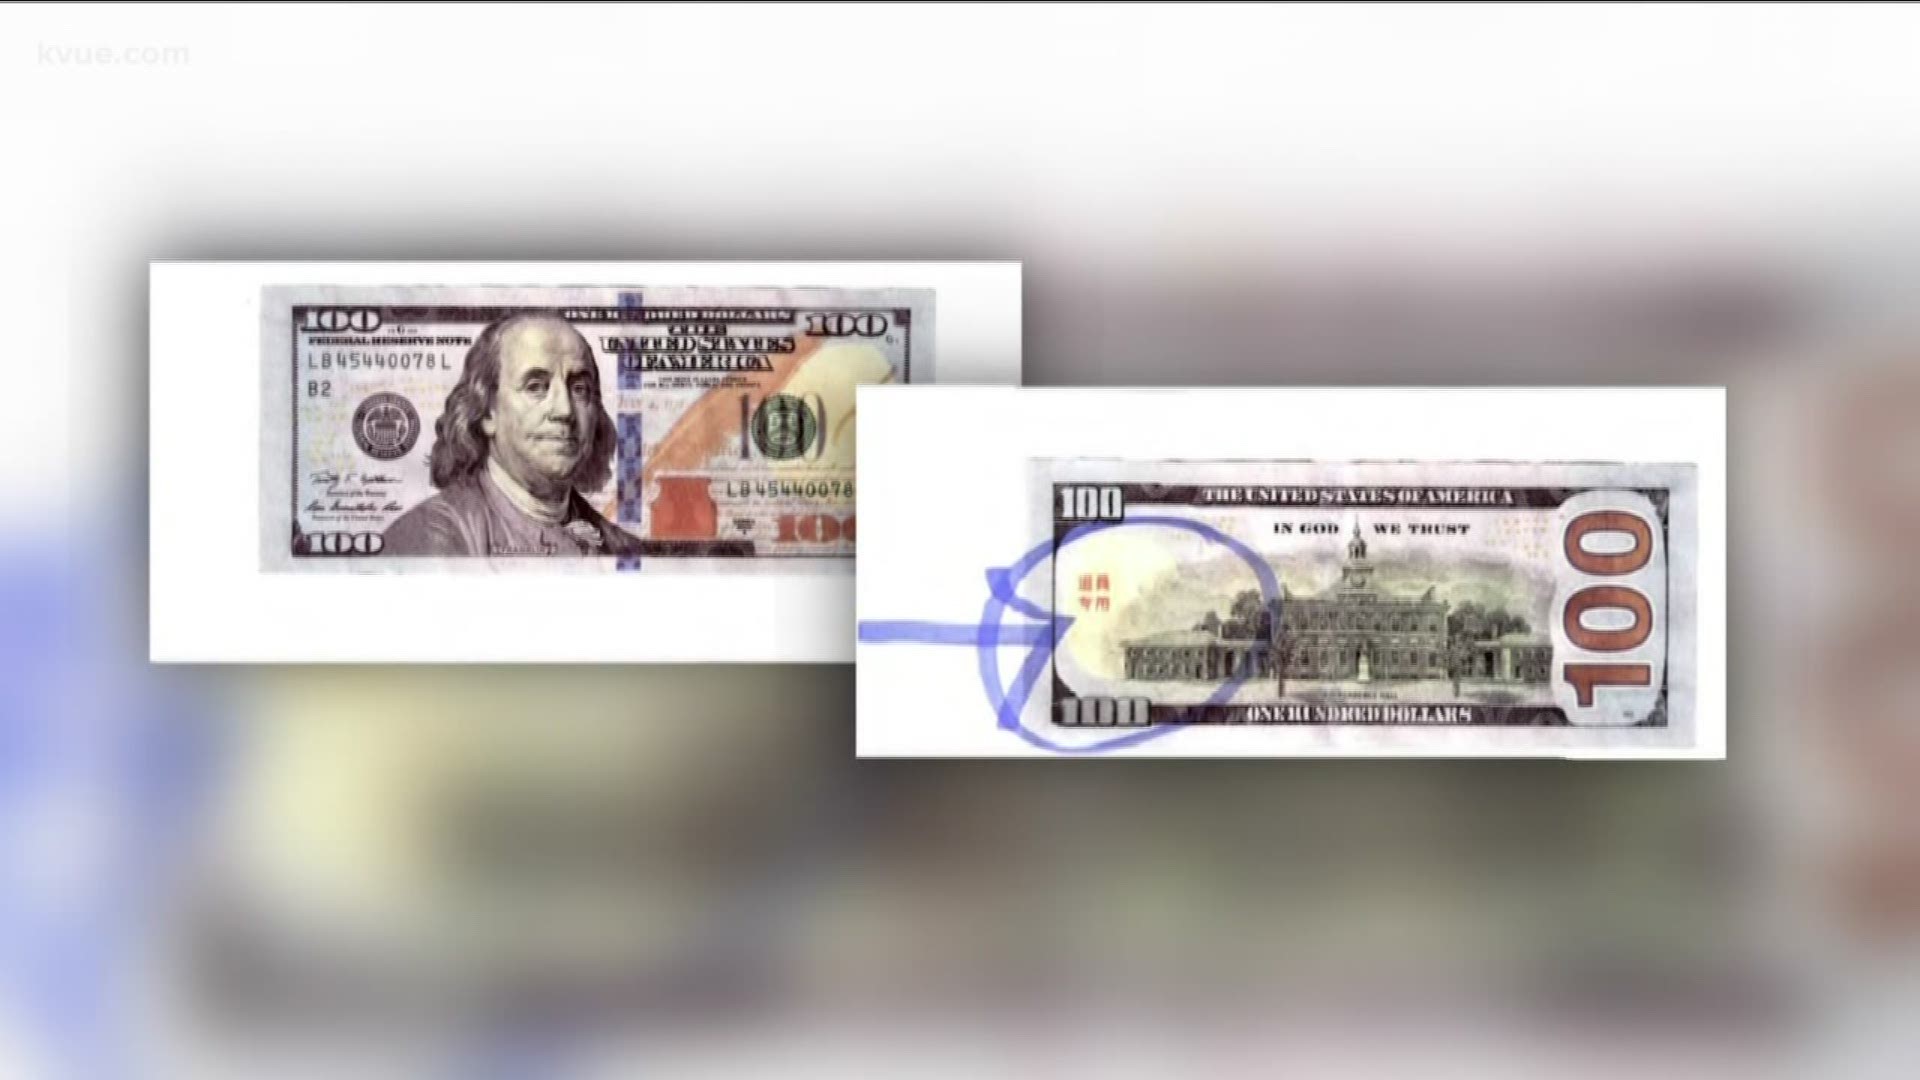 The fake bills have red Chinese letters on them.